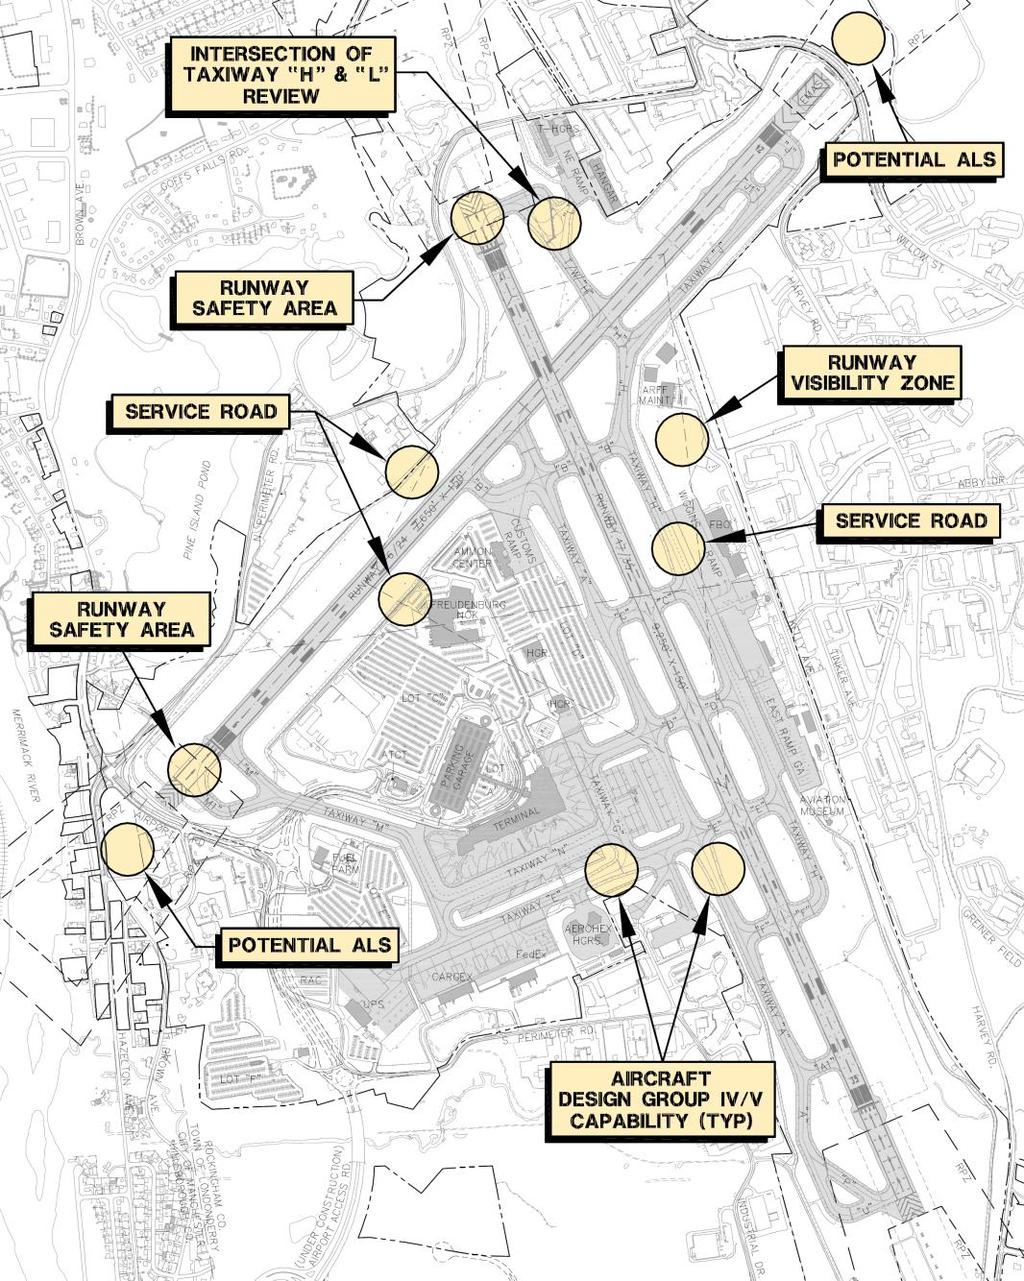 5.2 AIRFIELD PLANNING CONSIDERATIONS The previous (1997) Airport Master Plan Update focused on the airfield improvements.